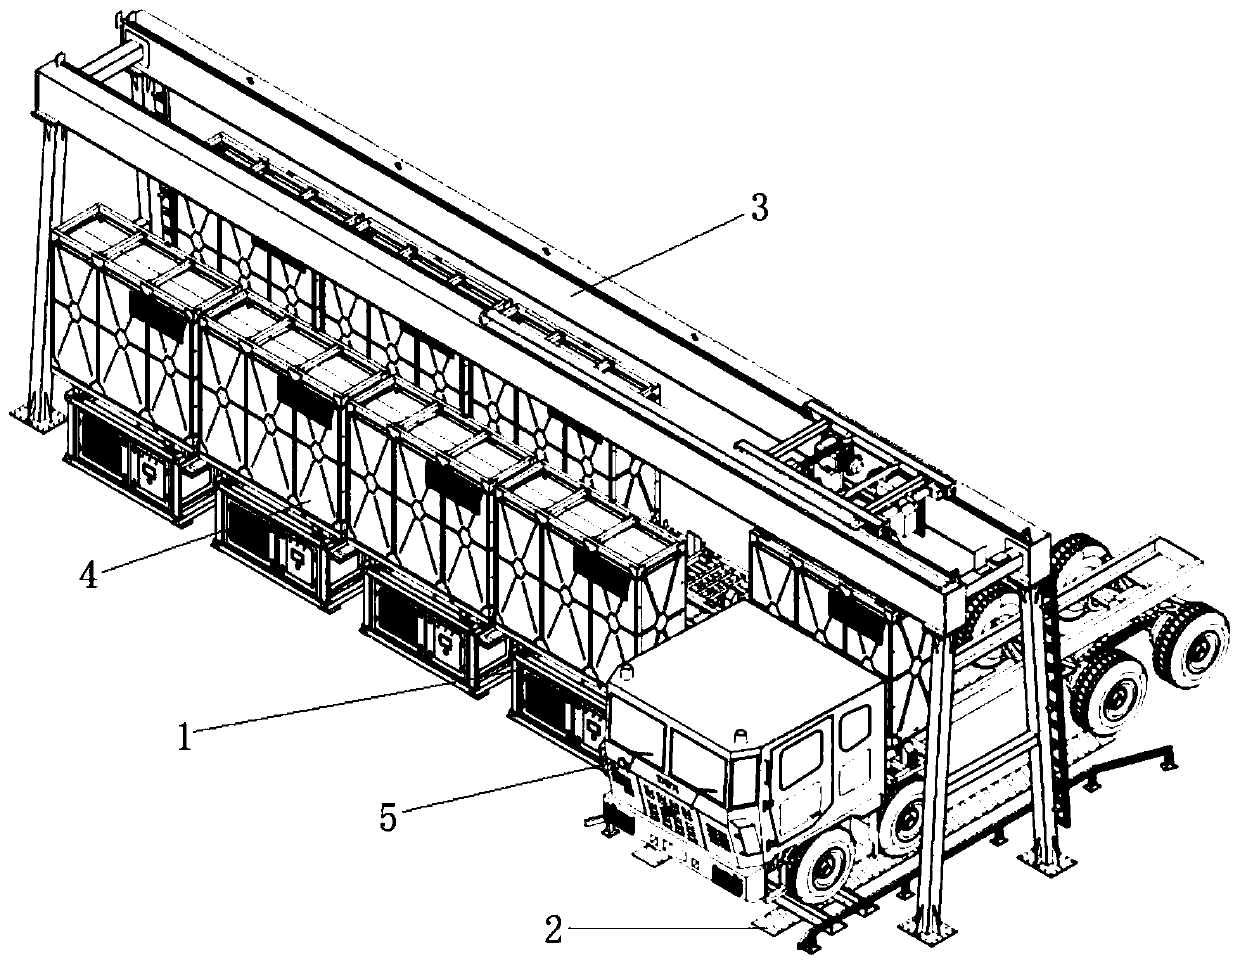 Electric heavy truck battery charging and replacing system